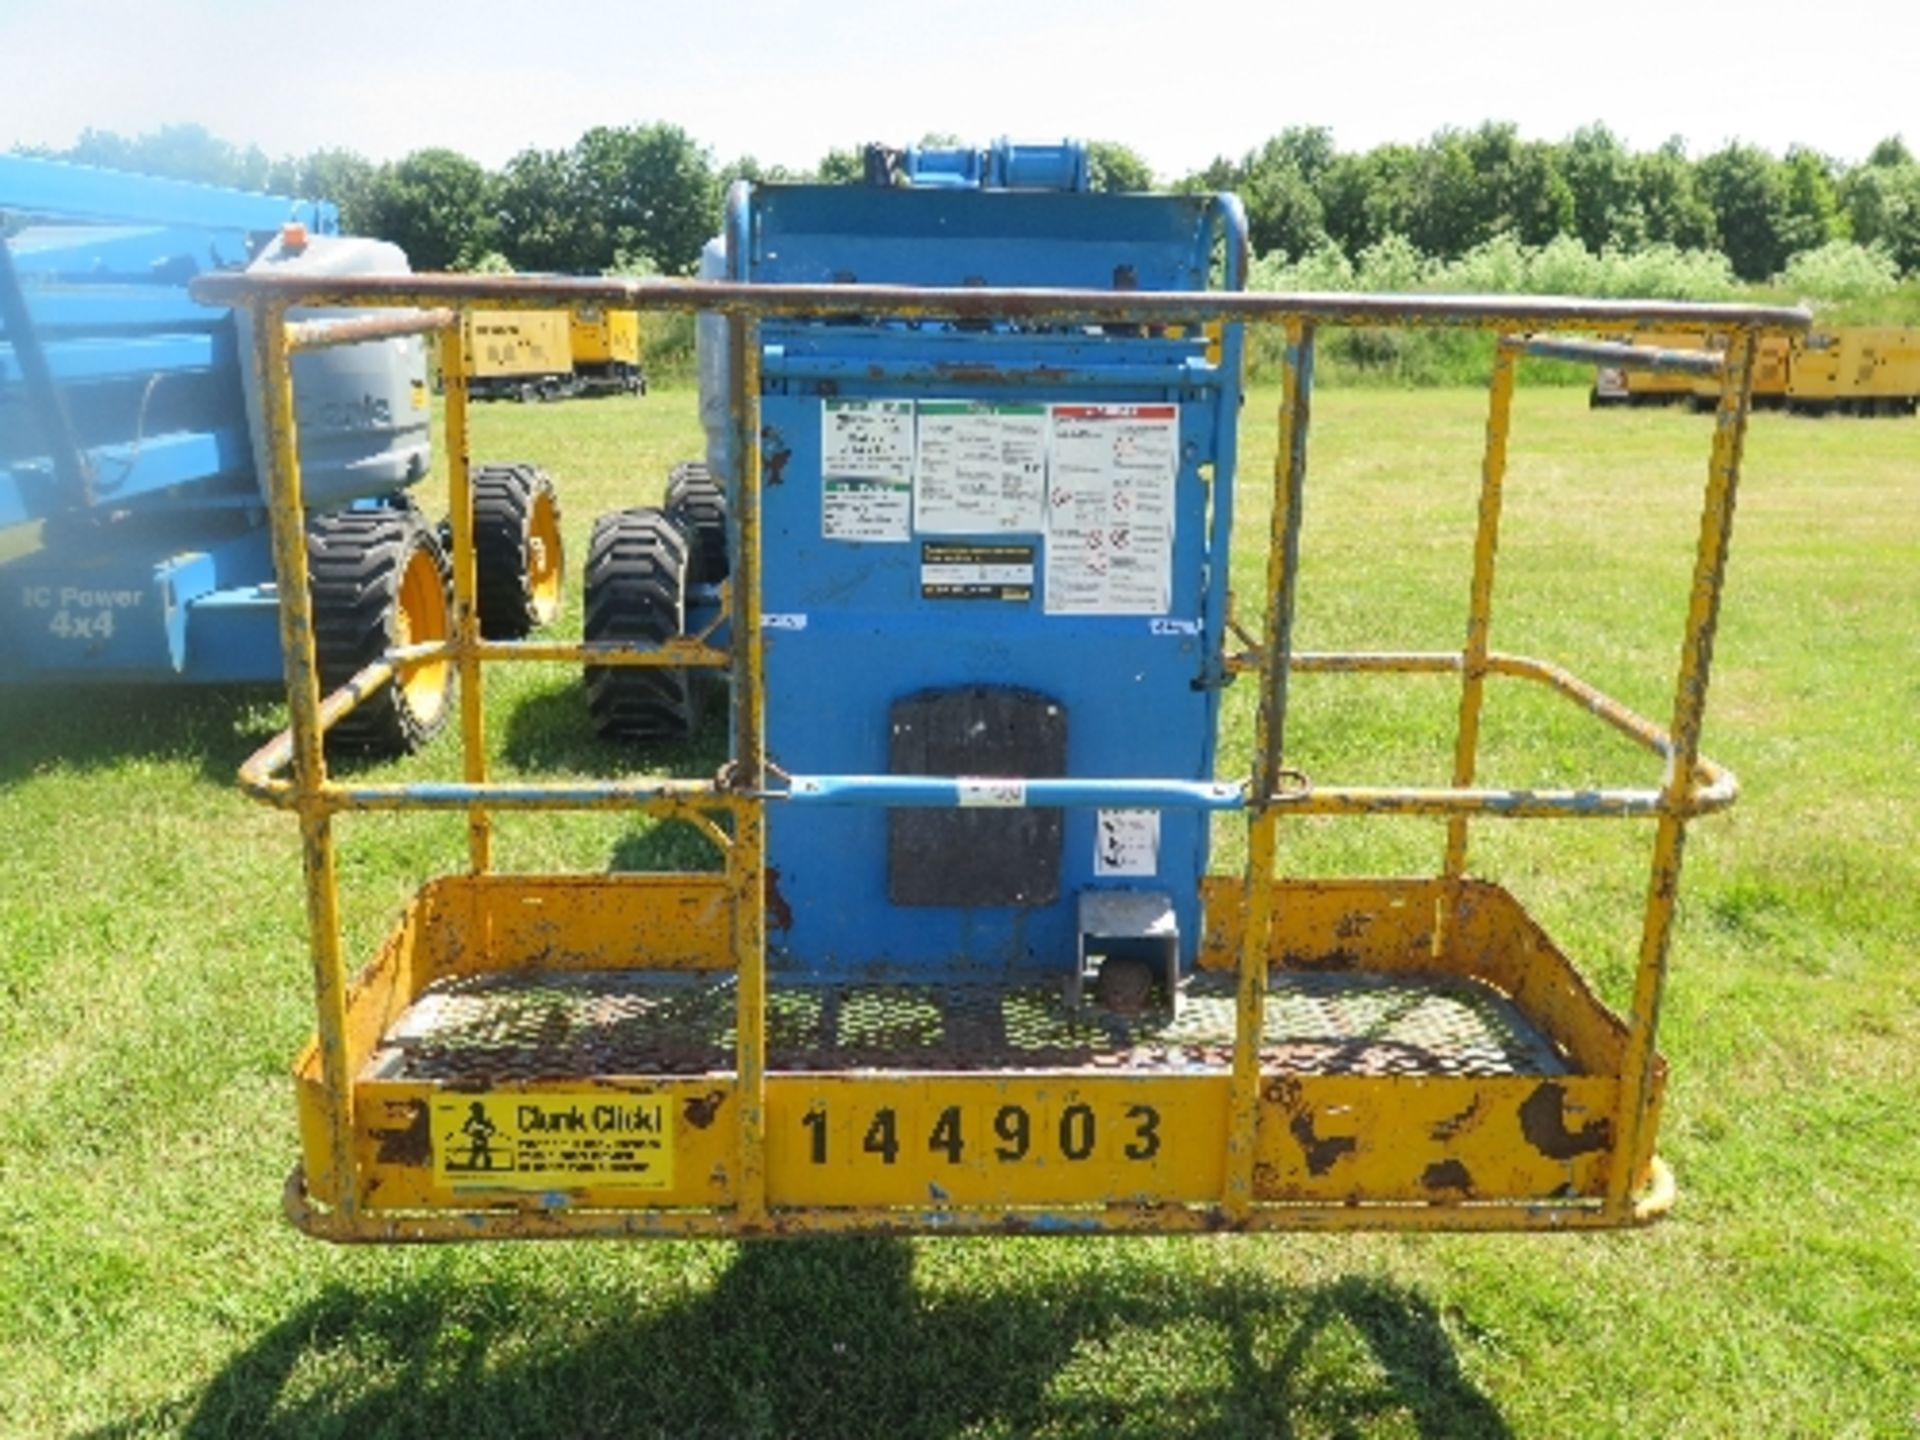 Genie Z45/25 artic boom 2993 hrs 2006 144903ALL LOTS are SOLD AS SEEN WITHOUT WARRANTY expressed, - Image 4 of 6